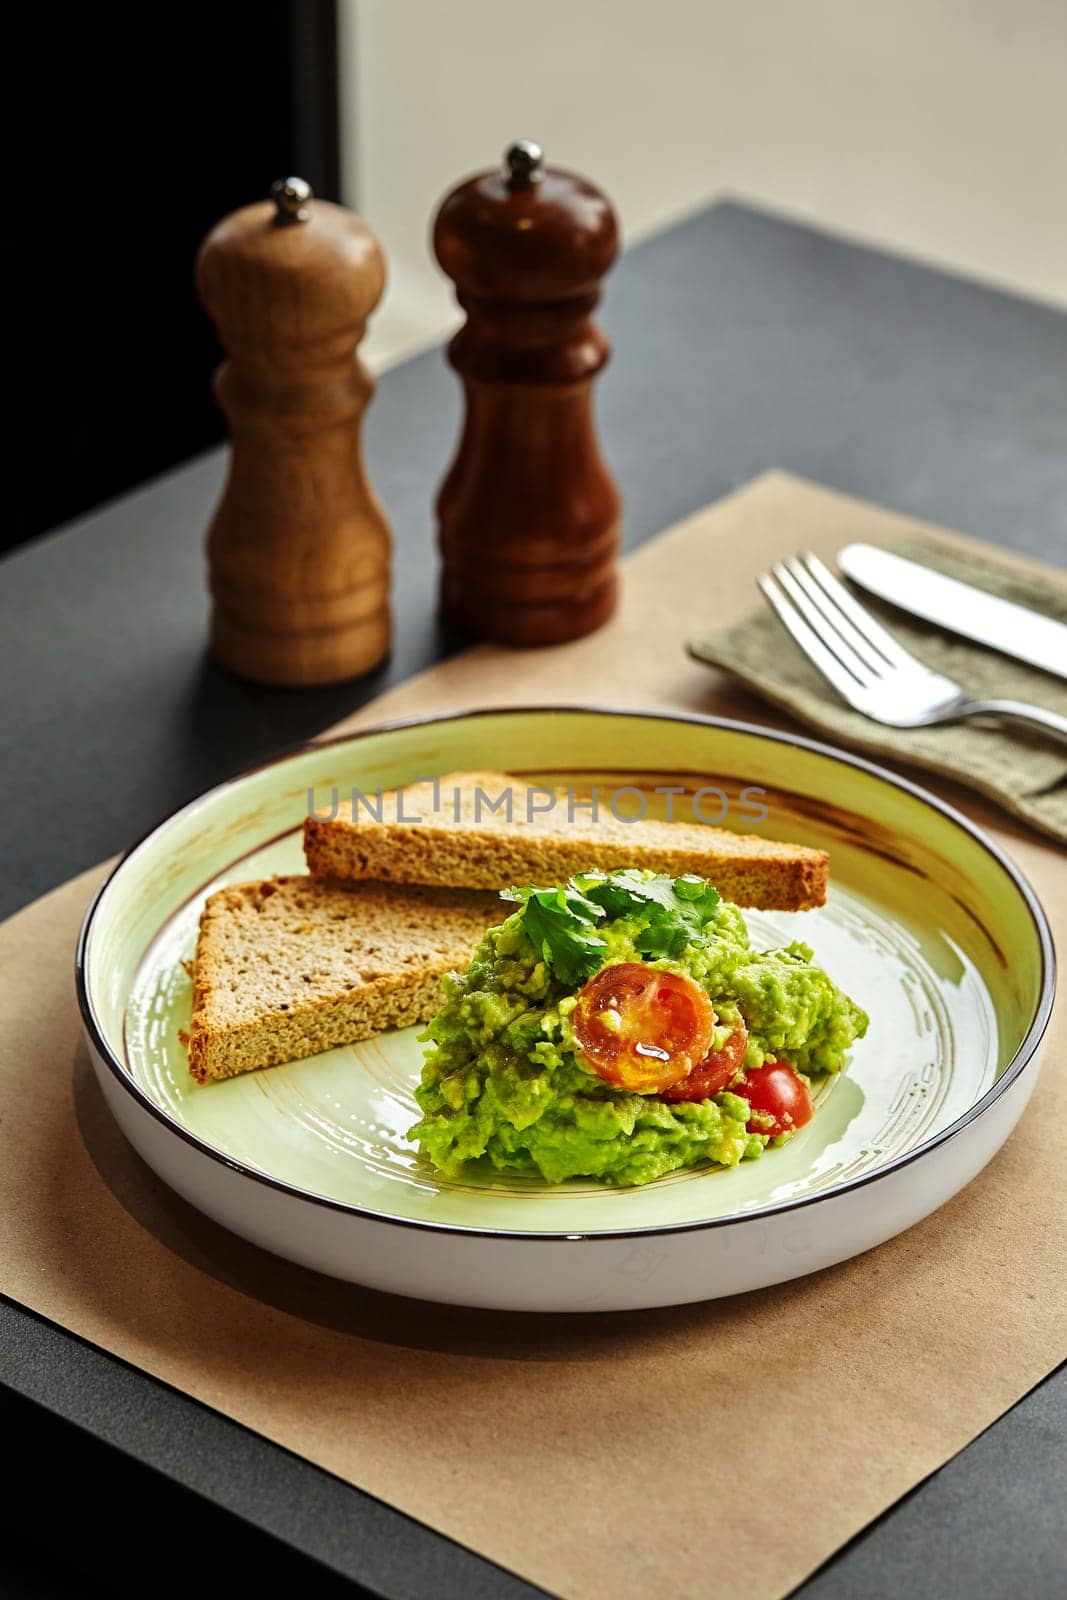 Vibrant freshly mashed piquant guacamole with juicy cherry tomatoes and green herbs served on plate with crispy toasts, accompanied by wooden salt and pepper shakers. Light Mexican style snack concept